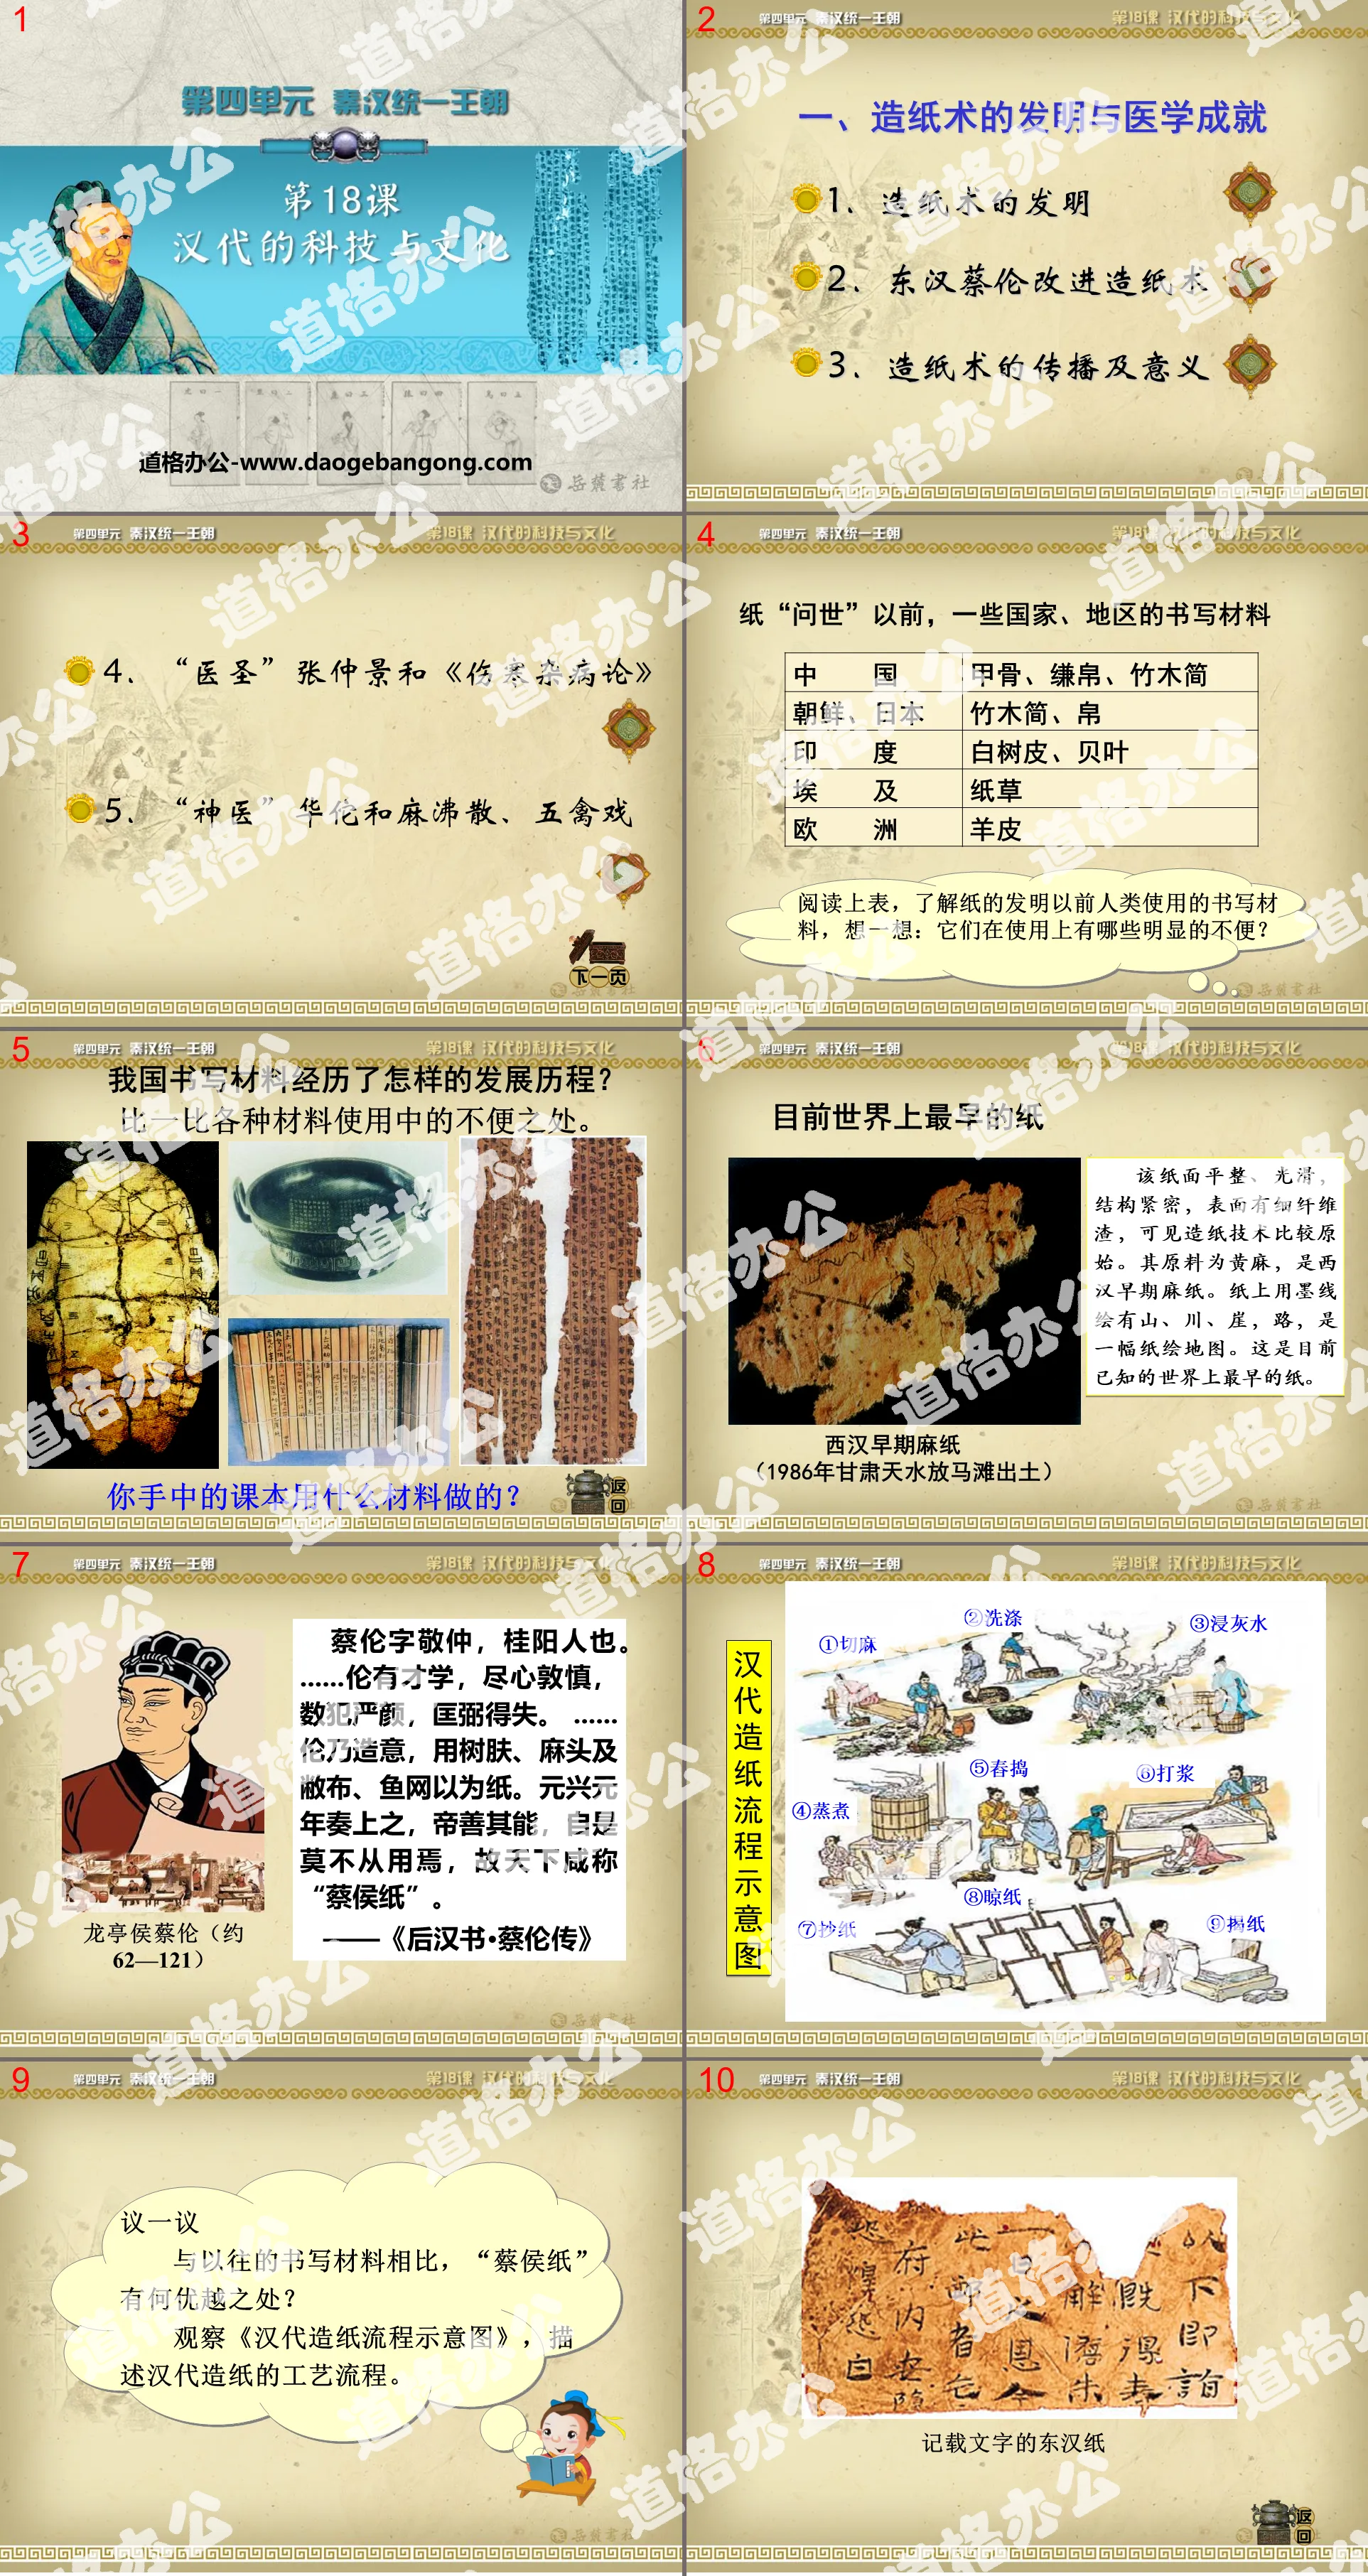 "Technology and Culture of the Han Dynasty" Qin and Han Unified Dynasty PPT courseware 2